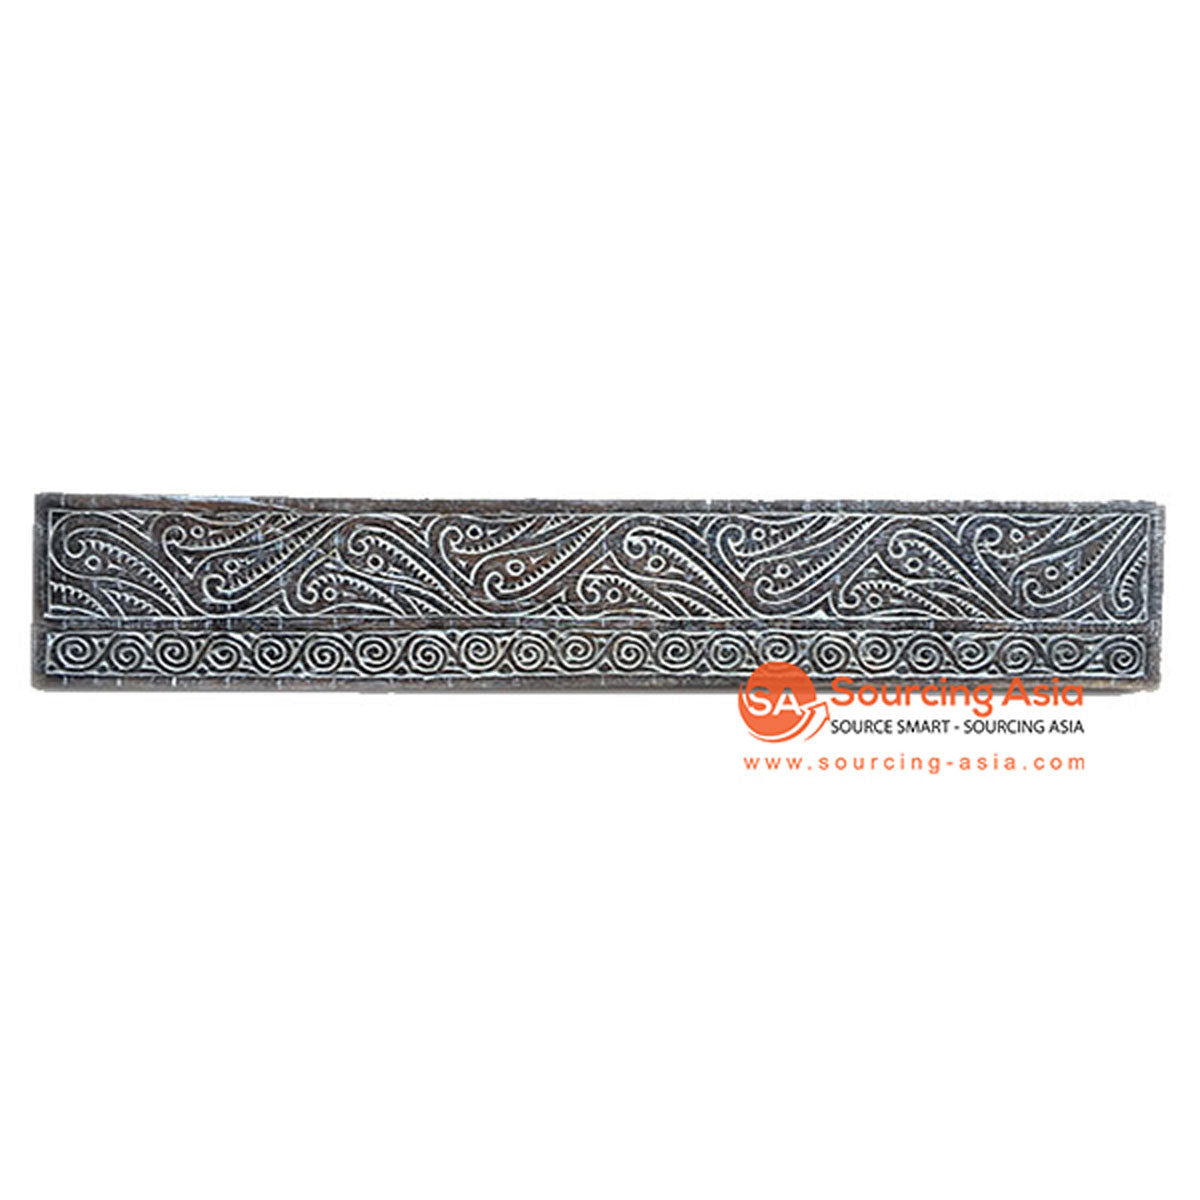 SHL075-9 WHITE WASH WOODEN CARVED WALL HOOK